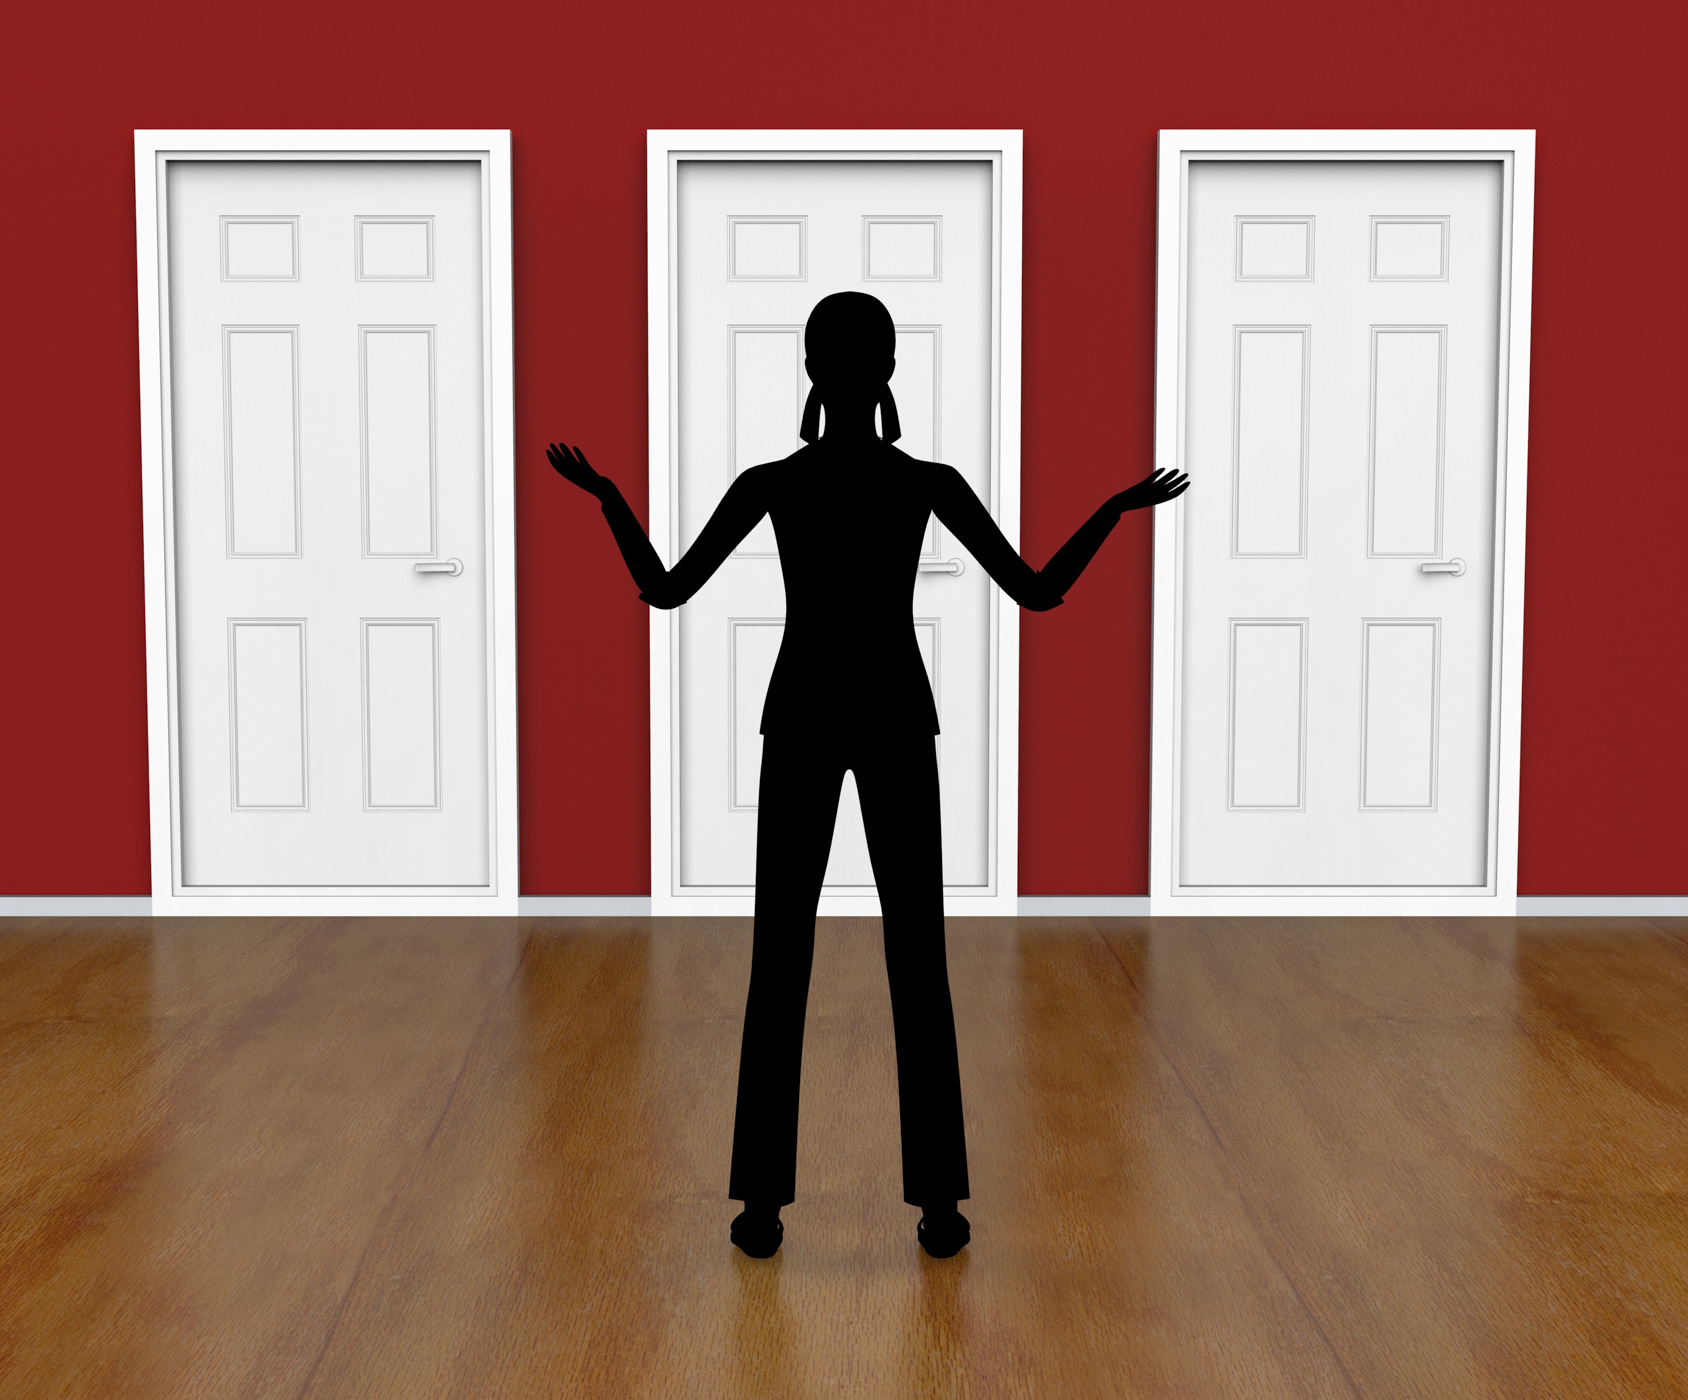 Silhouette doors means doorways direction and choose photo